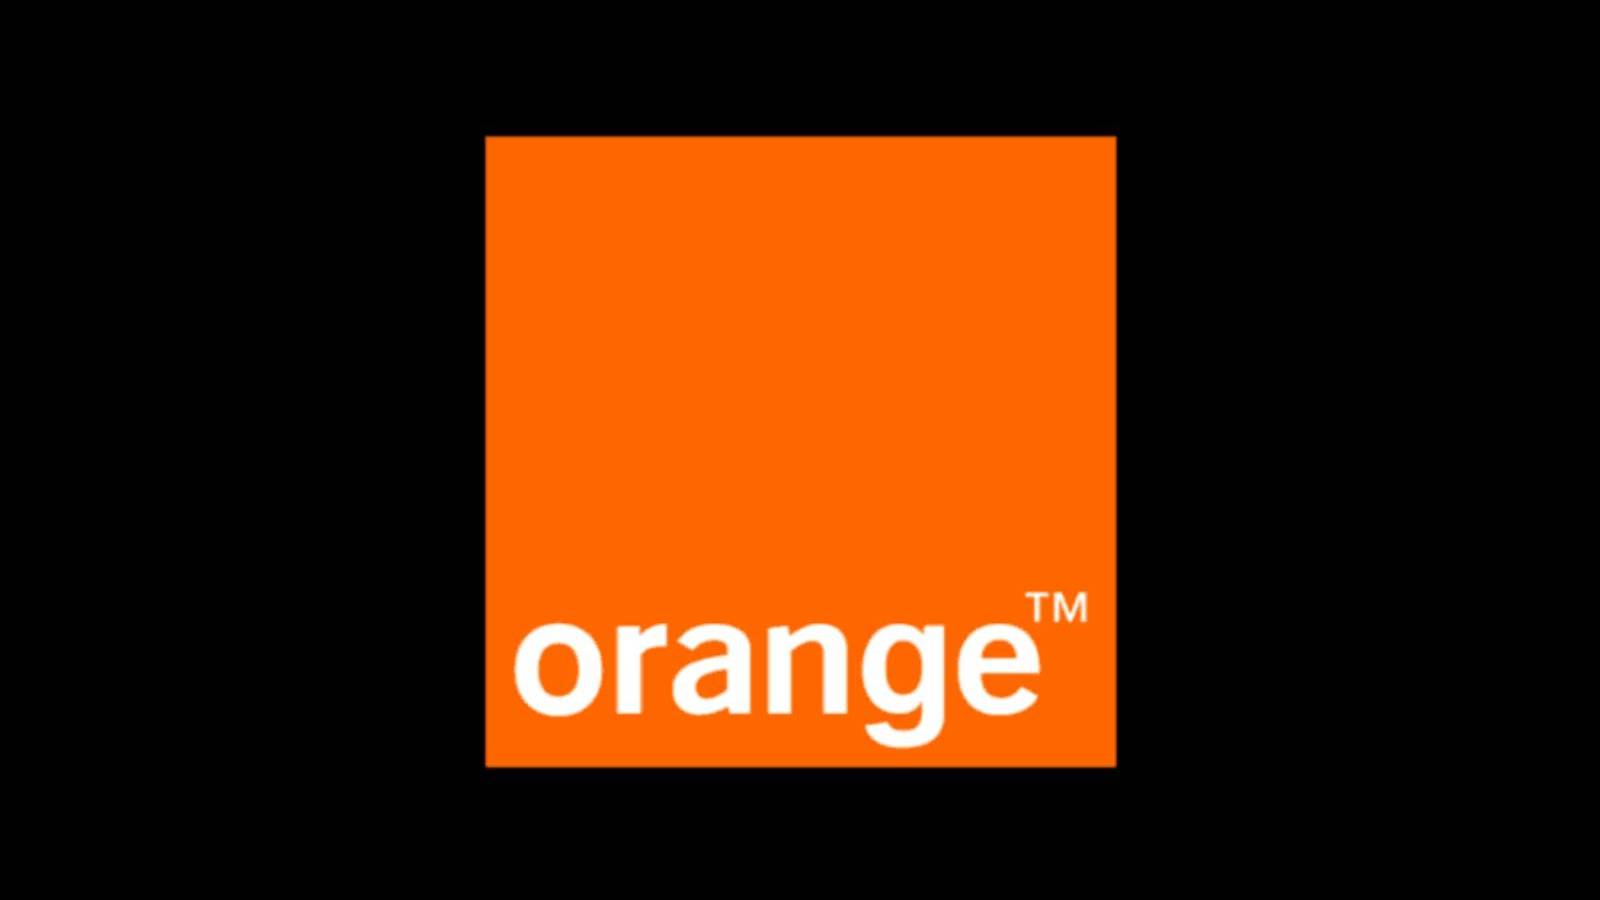 Orange Offers Free Weekly These Customer Benefits, which You Can Receive